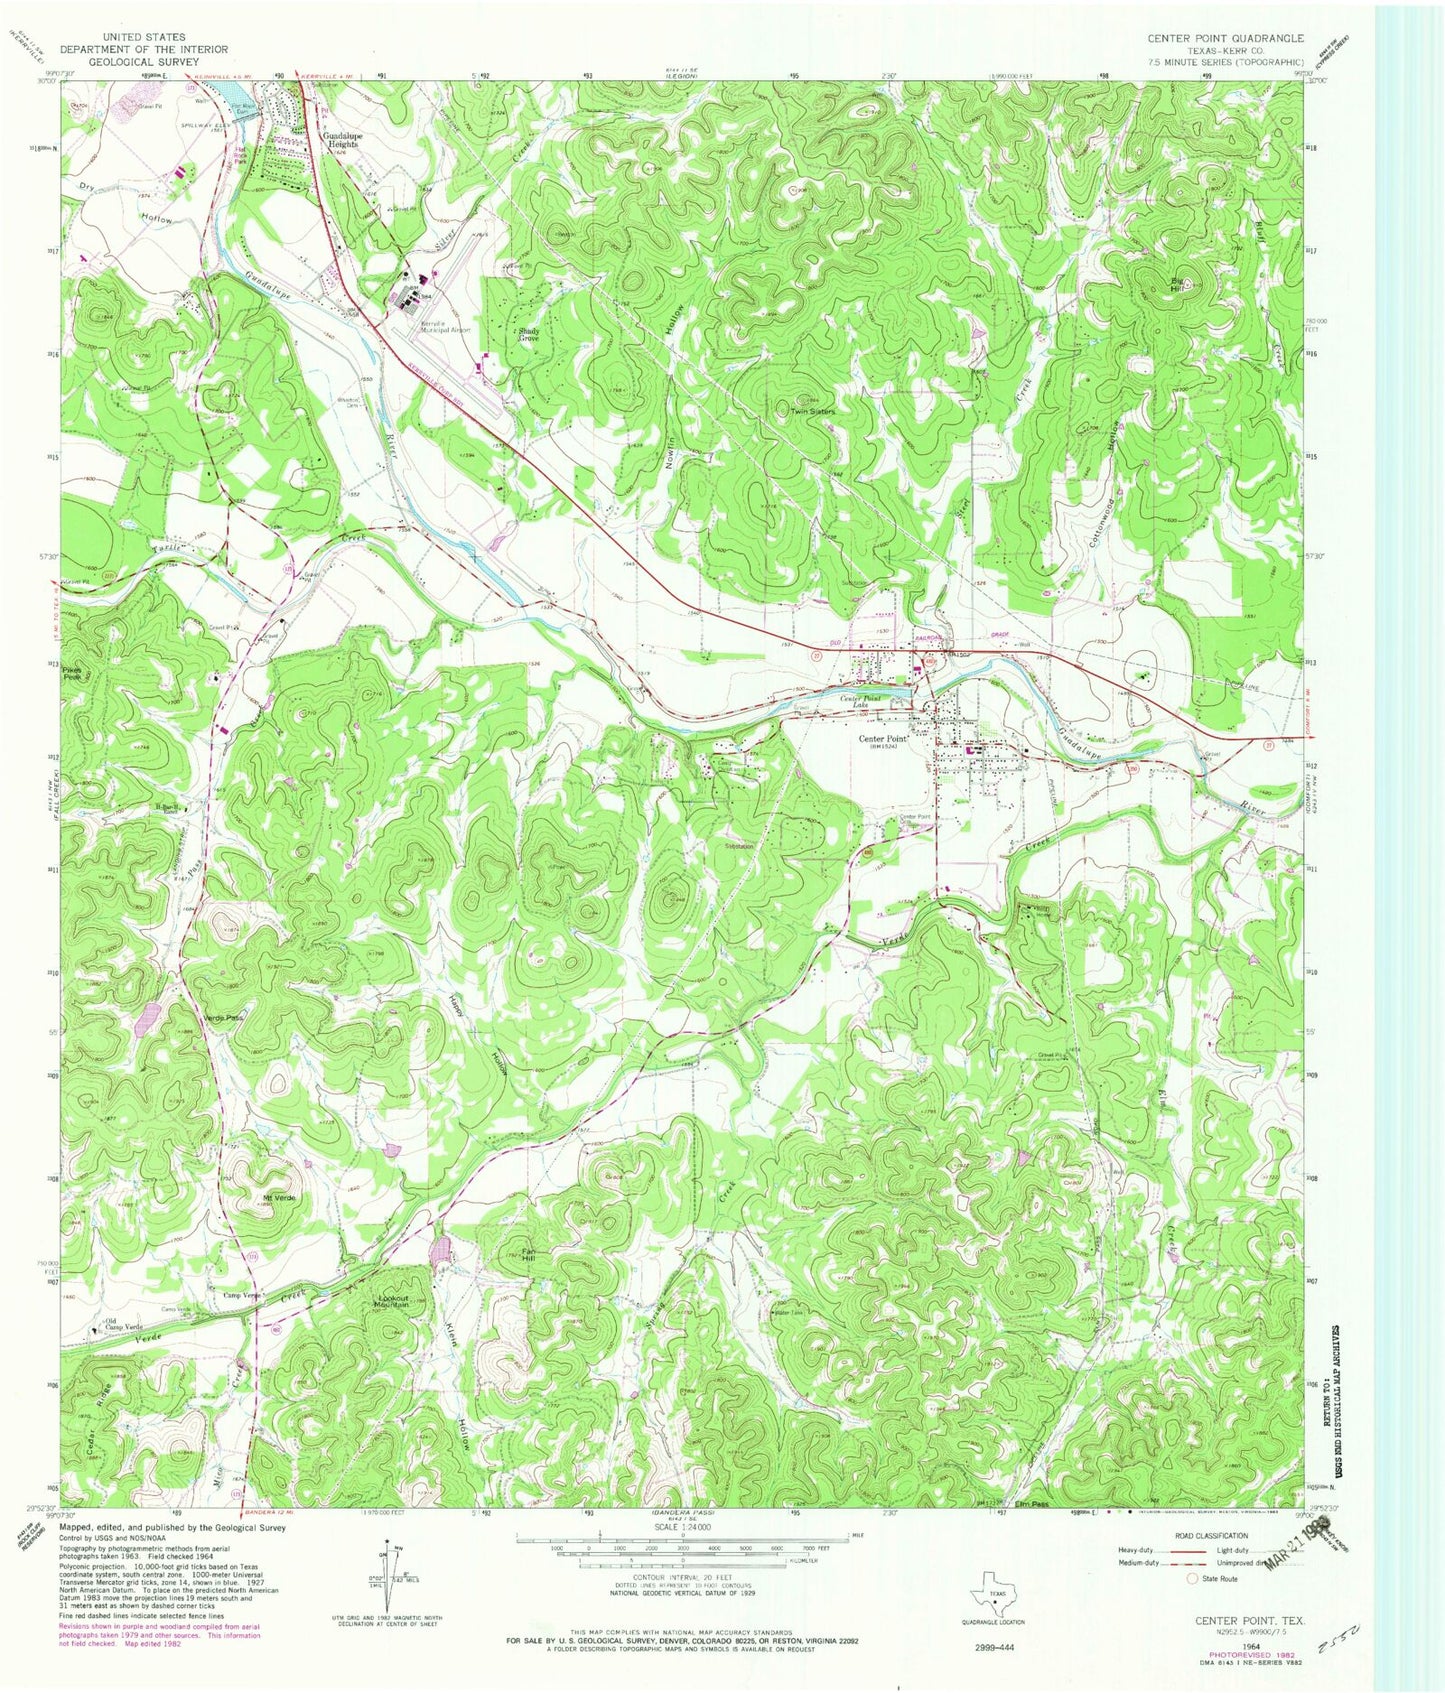 Classic USGS Center Point Texas 7.5'x7.5' Topo Map Image